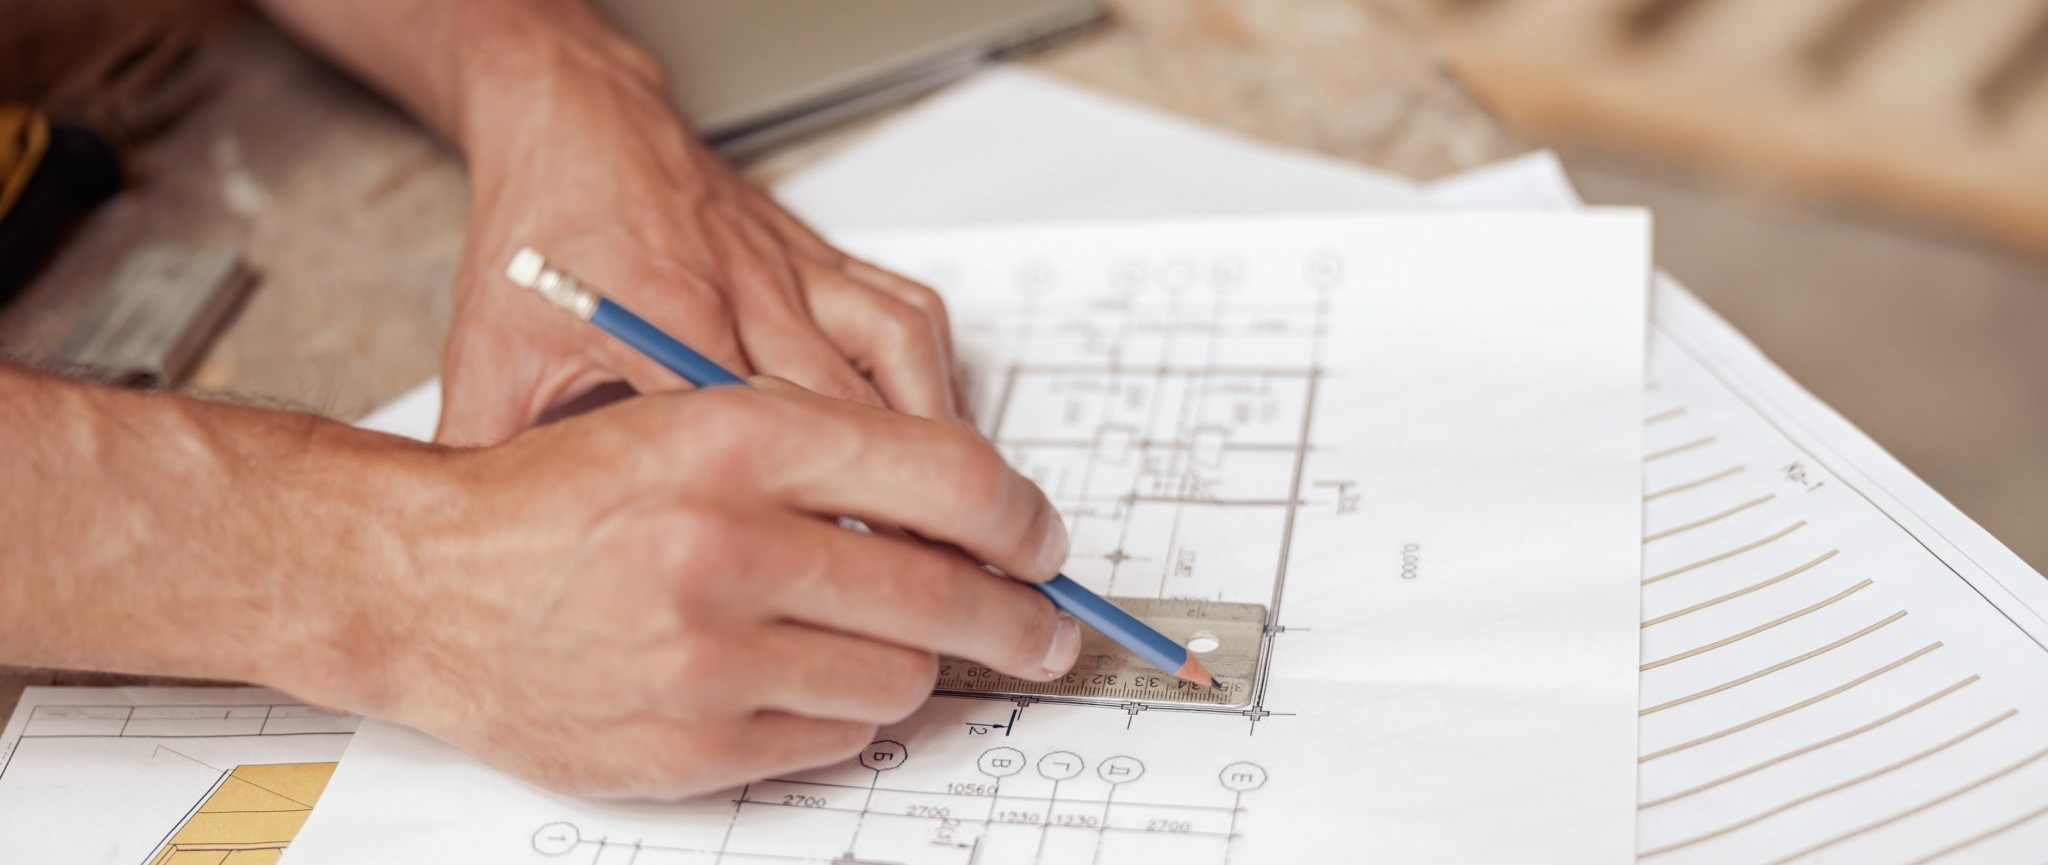 Man using ruler and pencil while working on home drawings.